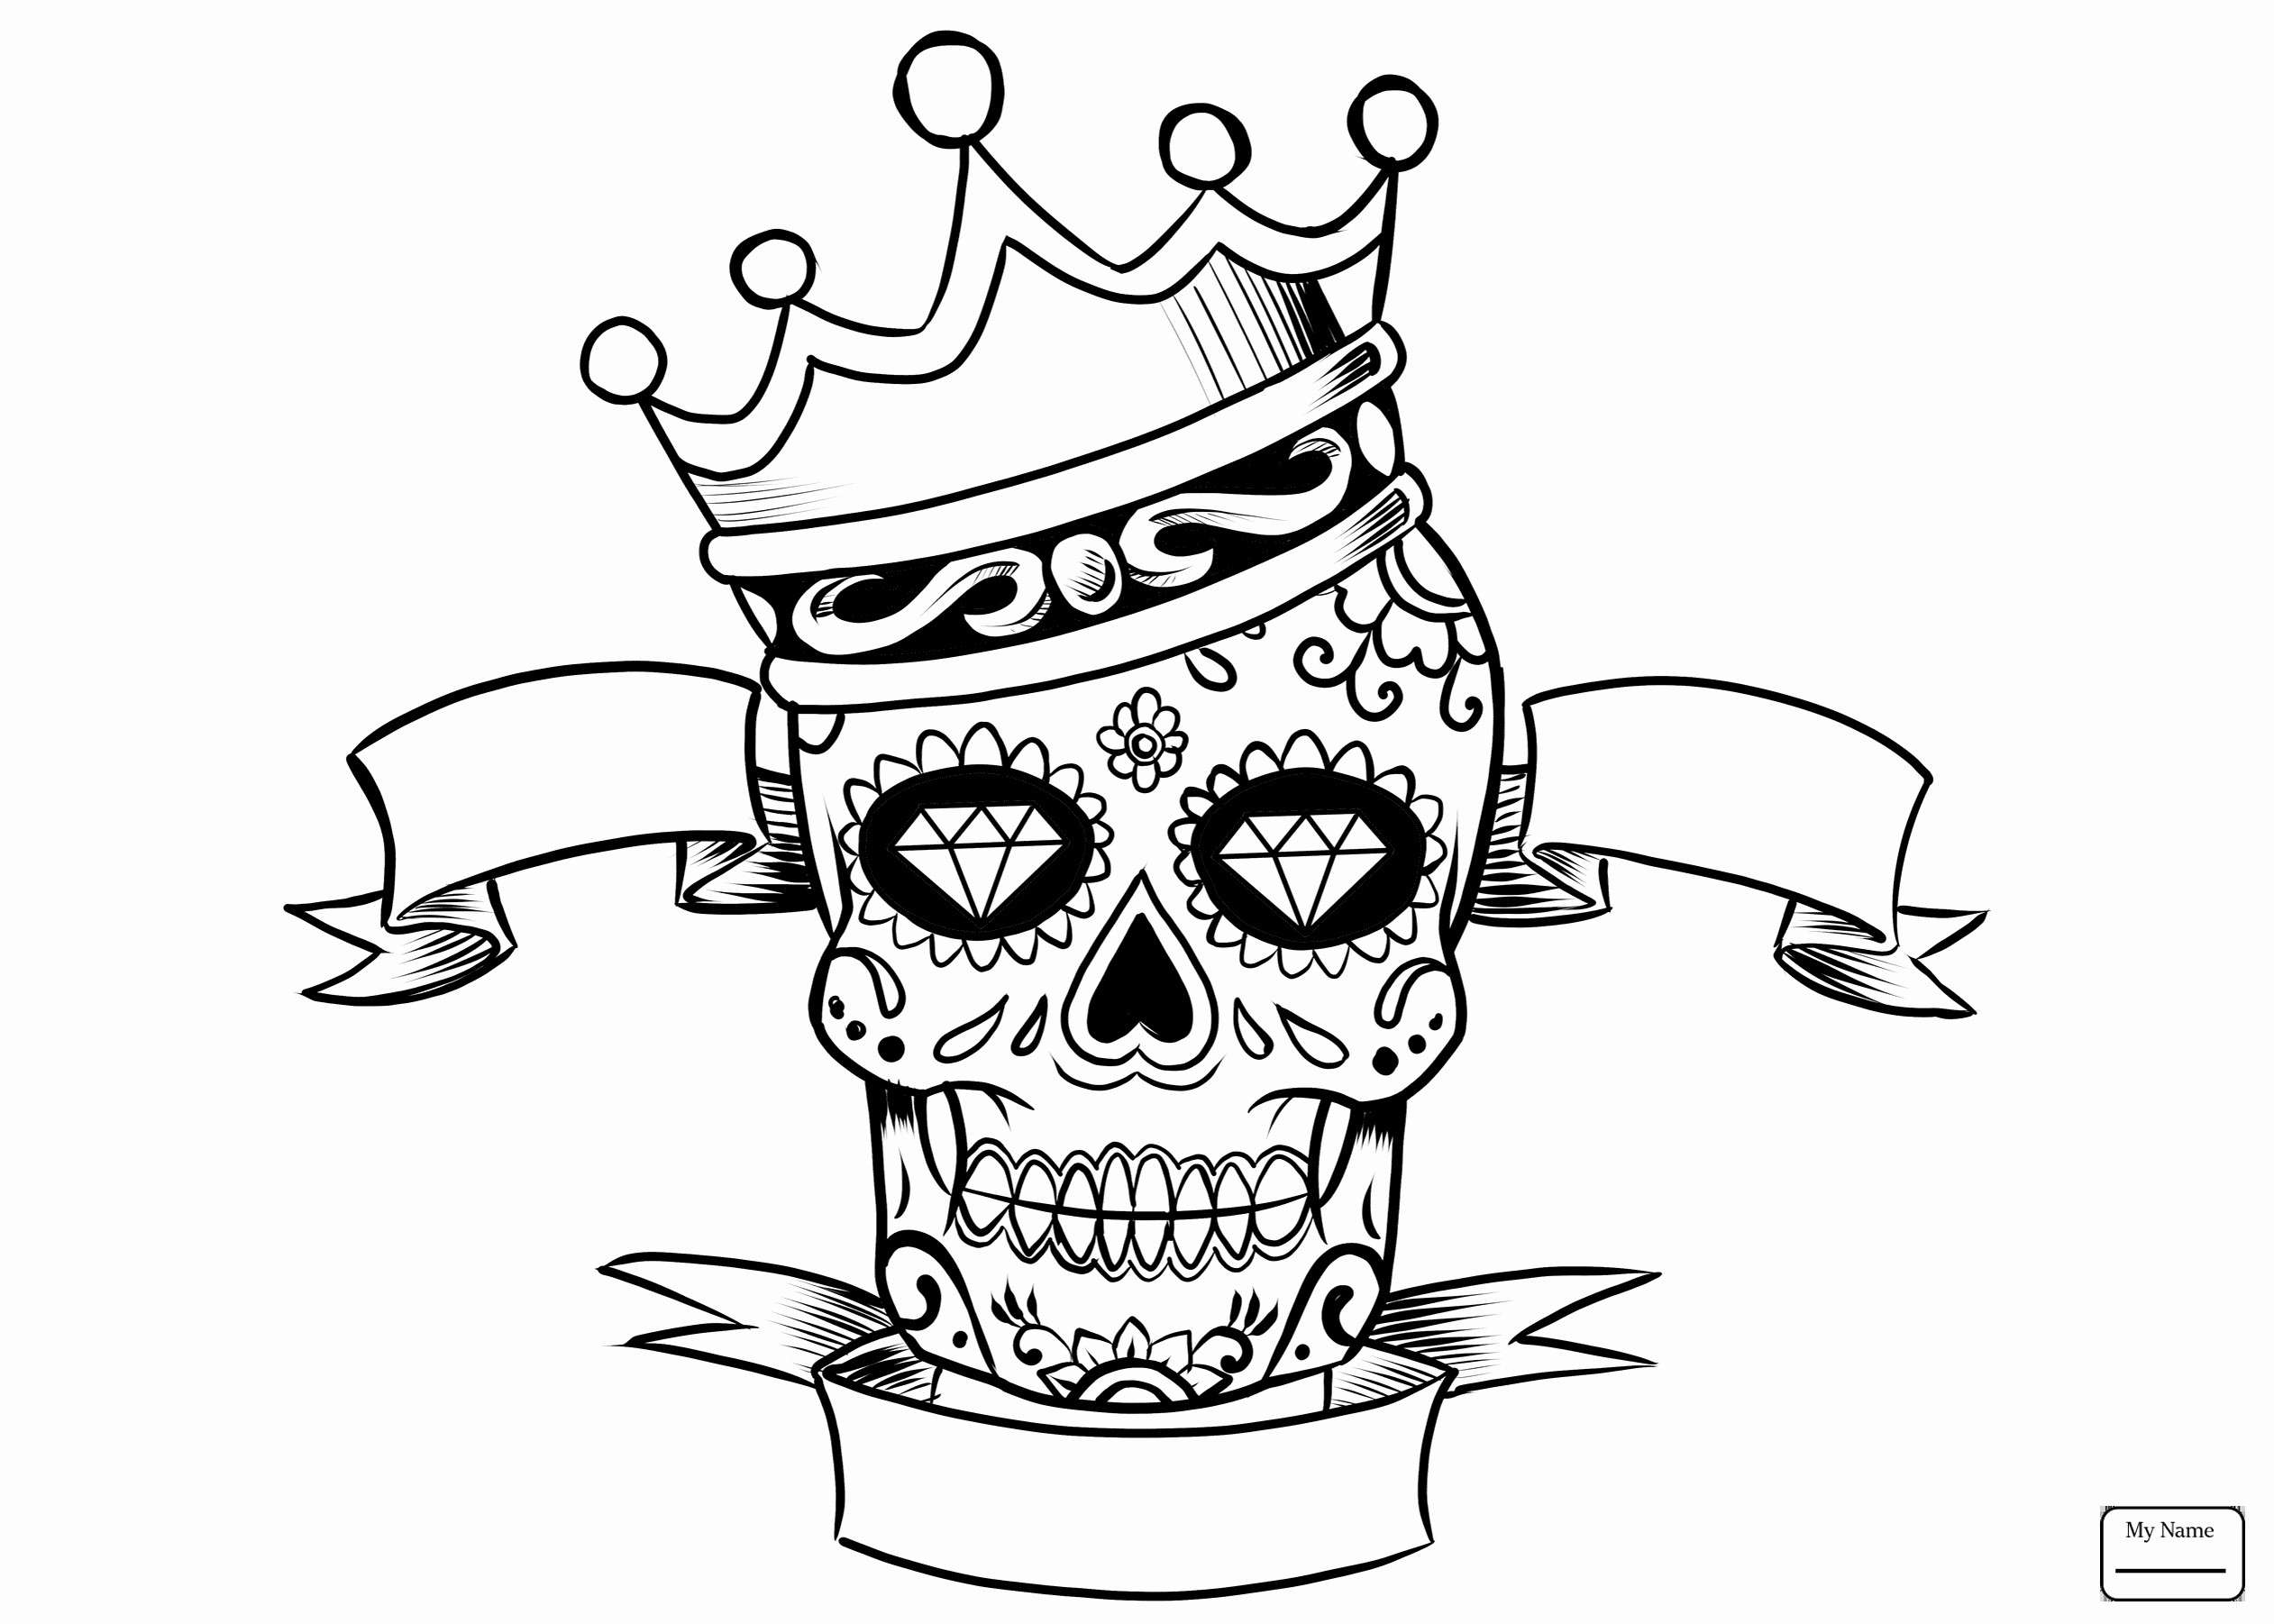  Skull  Coloring  Pages  for Adults  Best Coloring  Pages  For Kids